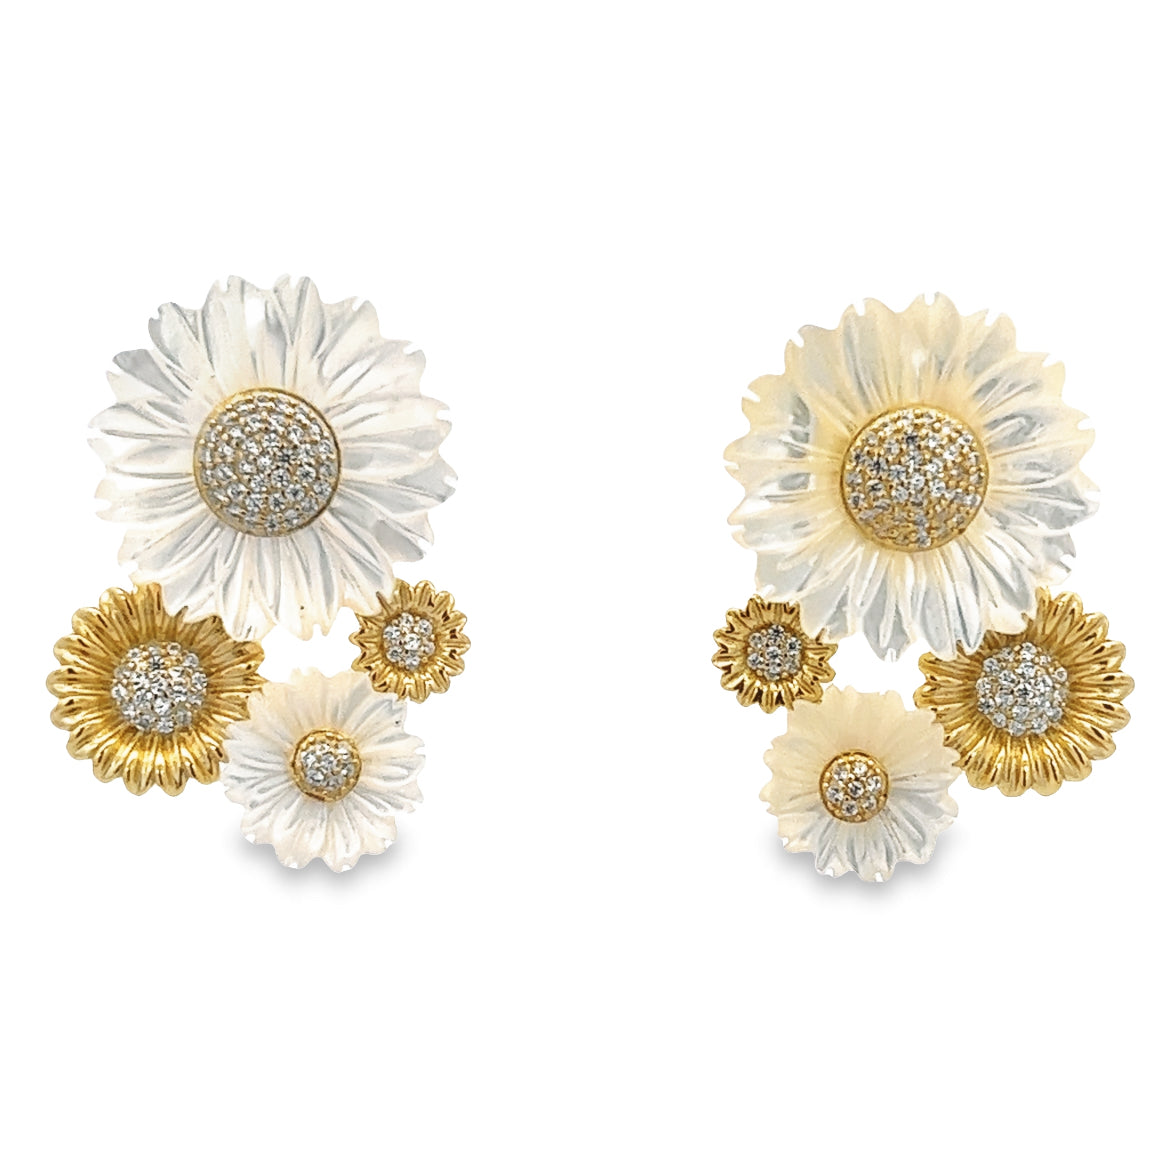 925 SILVER GOLD PLATED MOTHER OF PEARL FLOWER EARRINGS WITH CRYSTALS